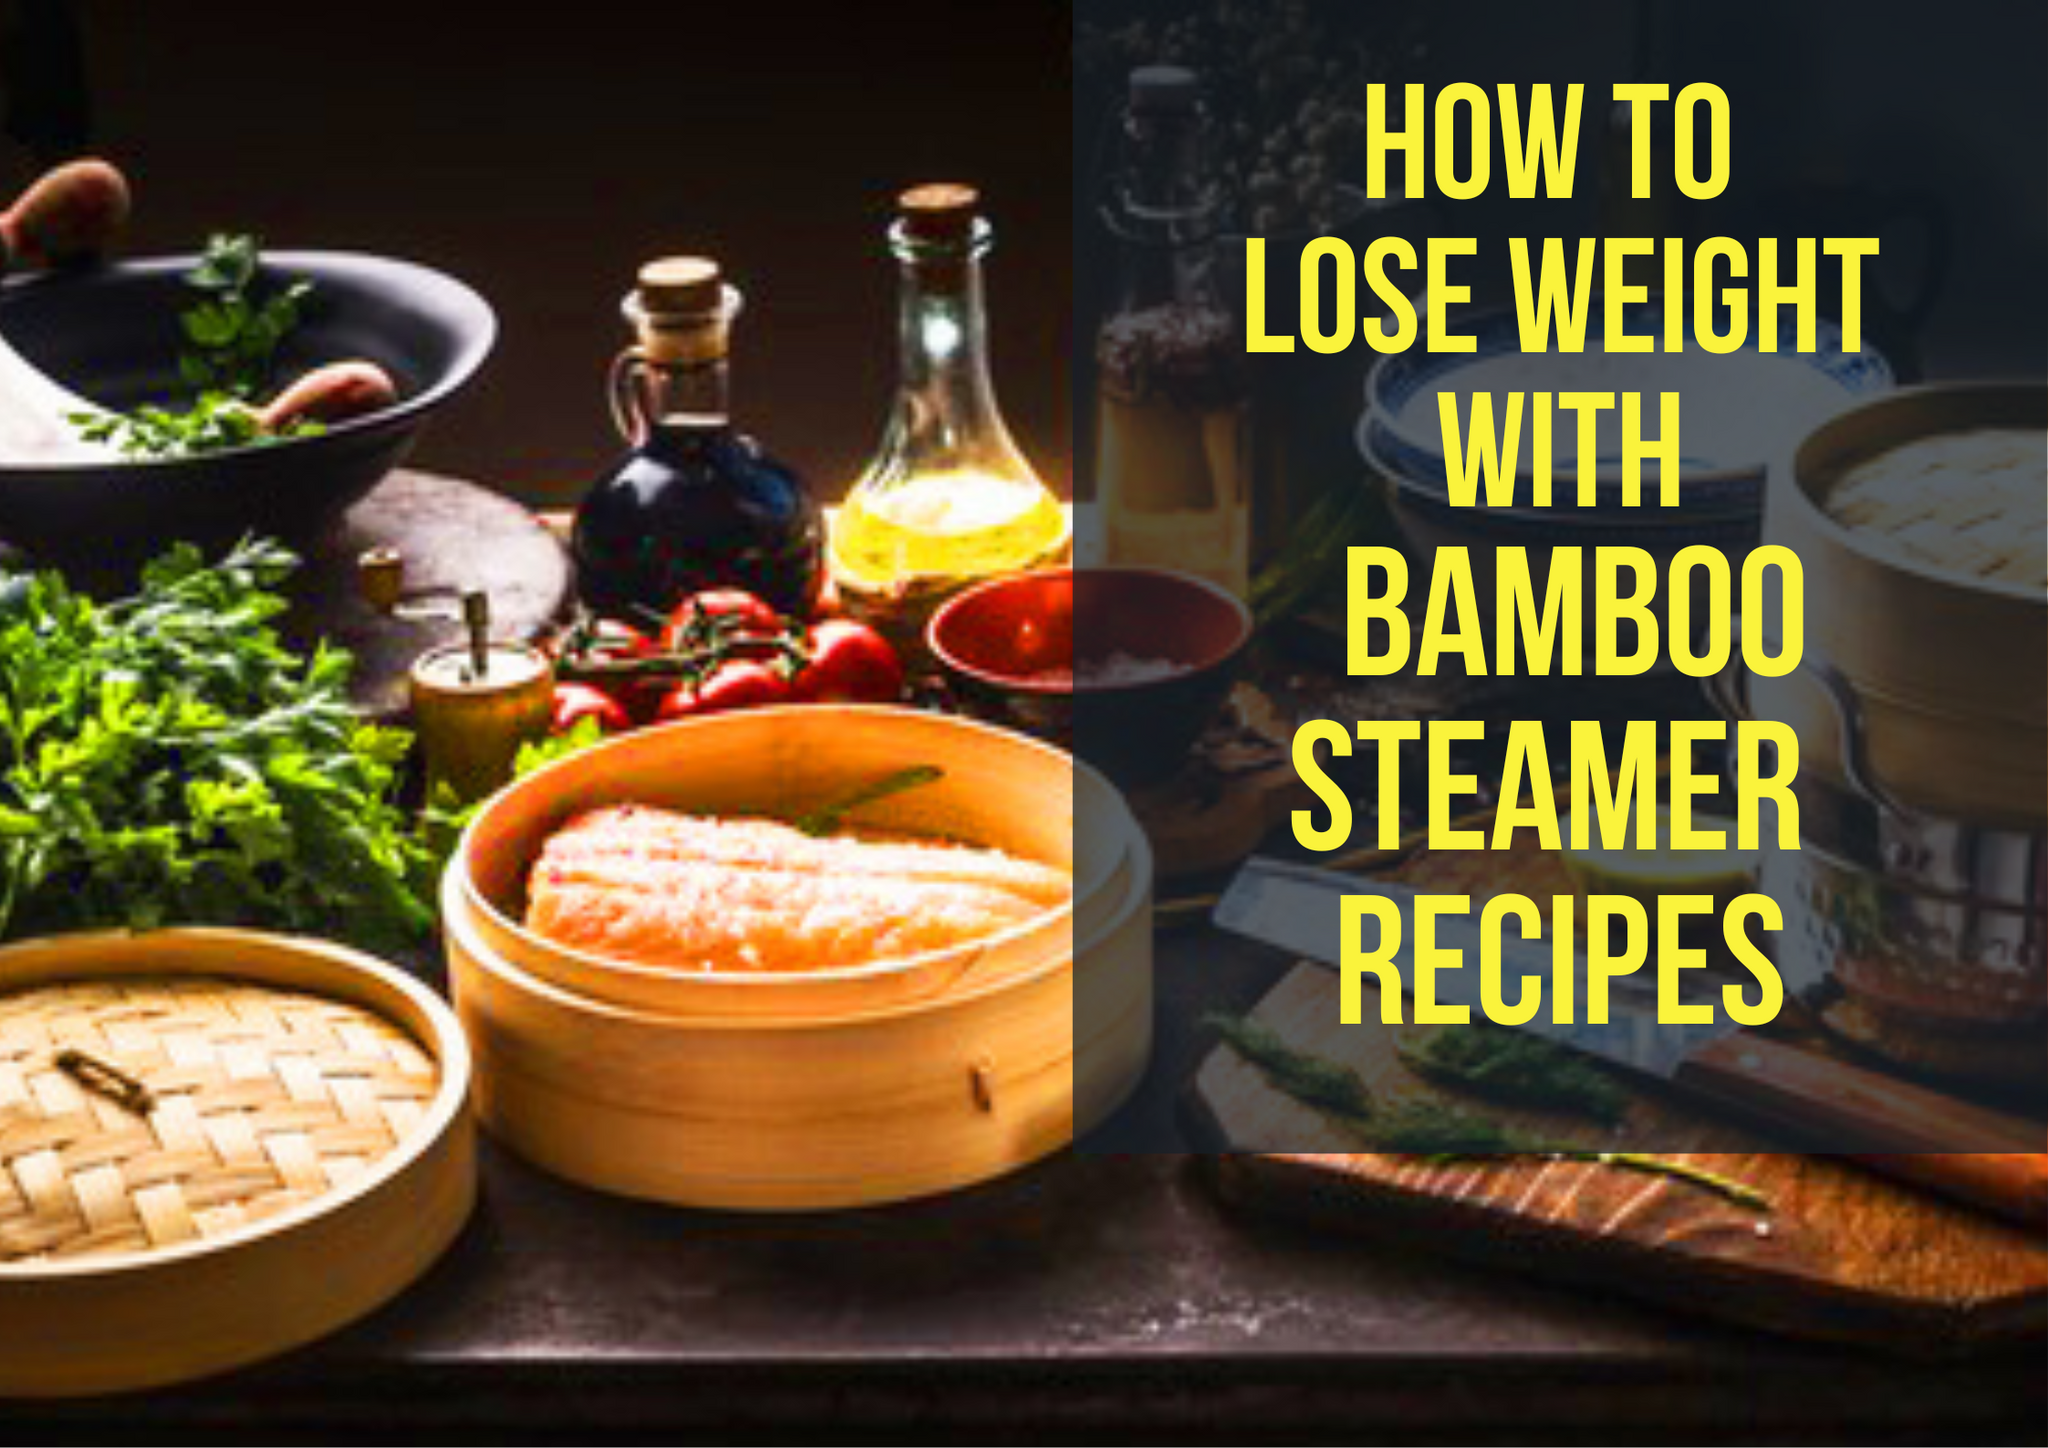 How to Lose Weight with Bamboo Steamer Recipes